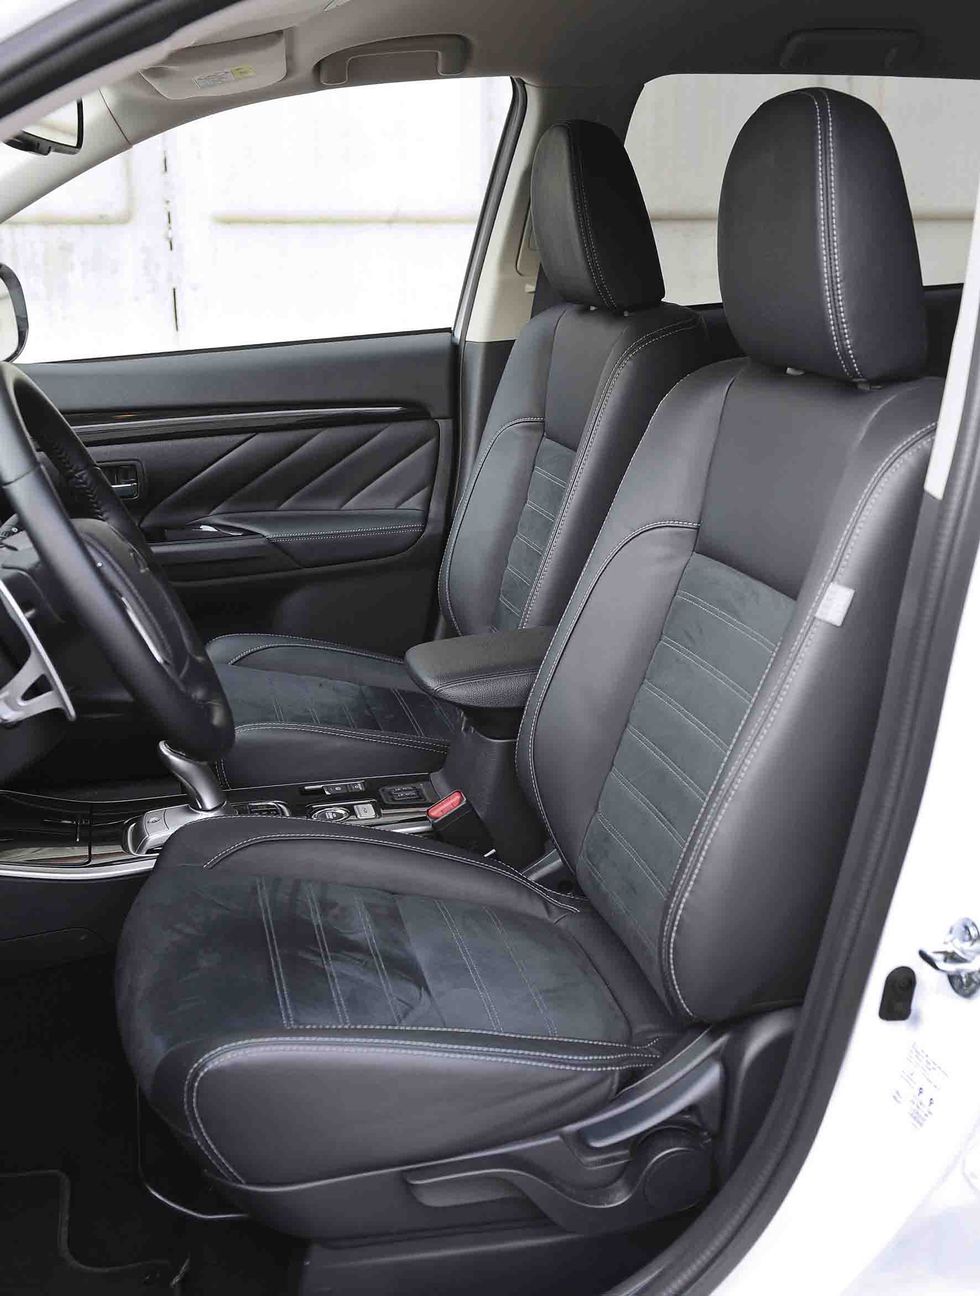 Land vehicle, Vehicle, Car, Car seat cover, Car seat, Mid-size car, Family car, Compact car, Leather, 